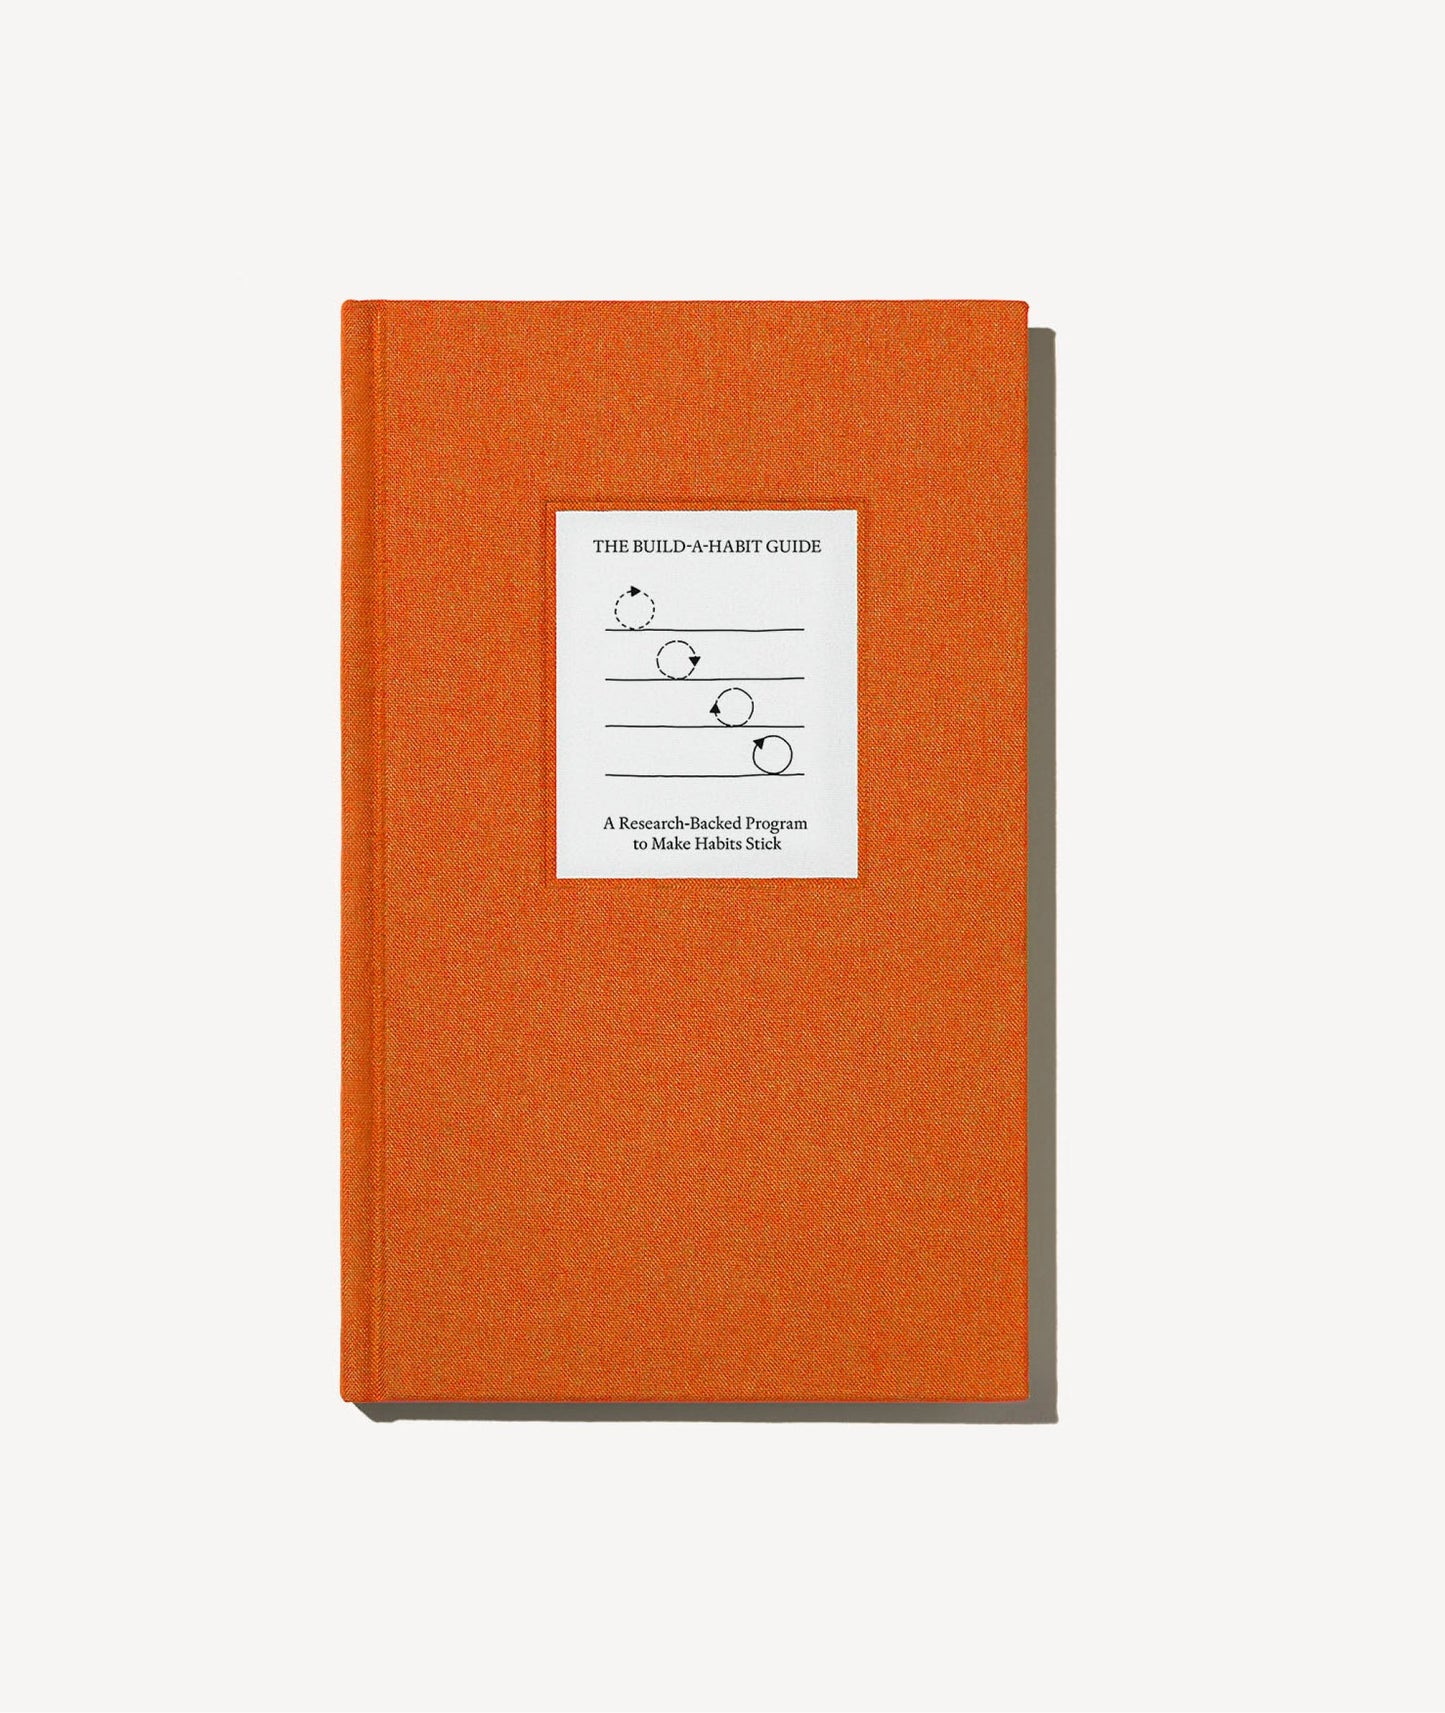 The Catalyst for Change Set by Therapy Notebooks